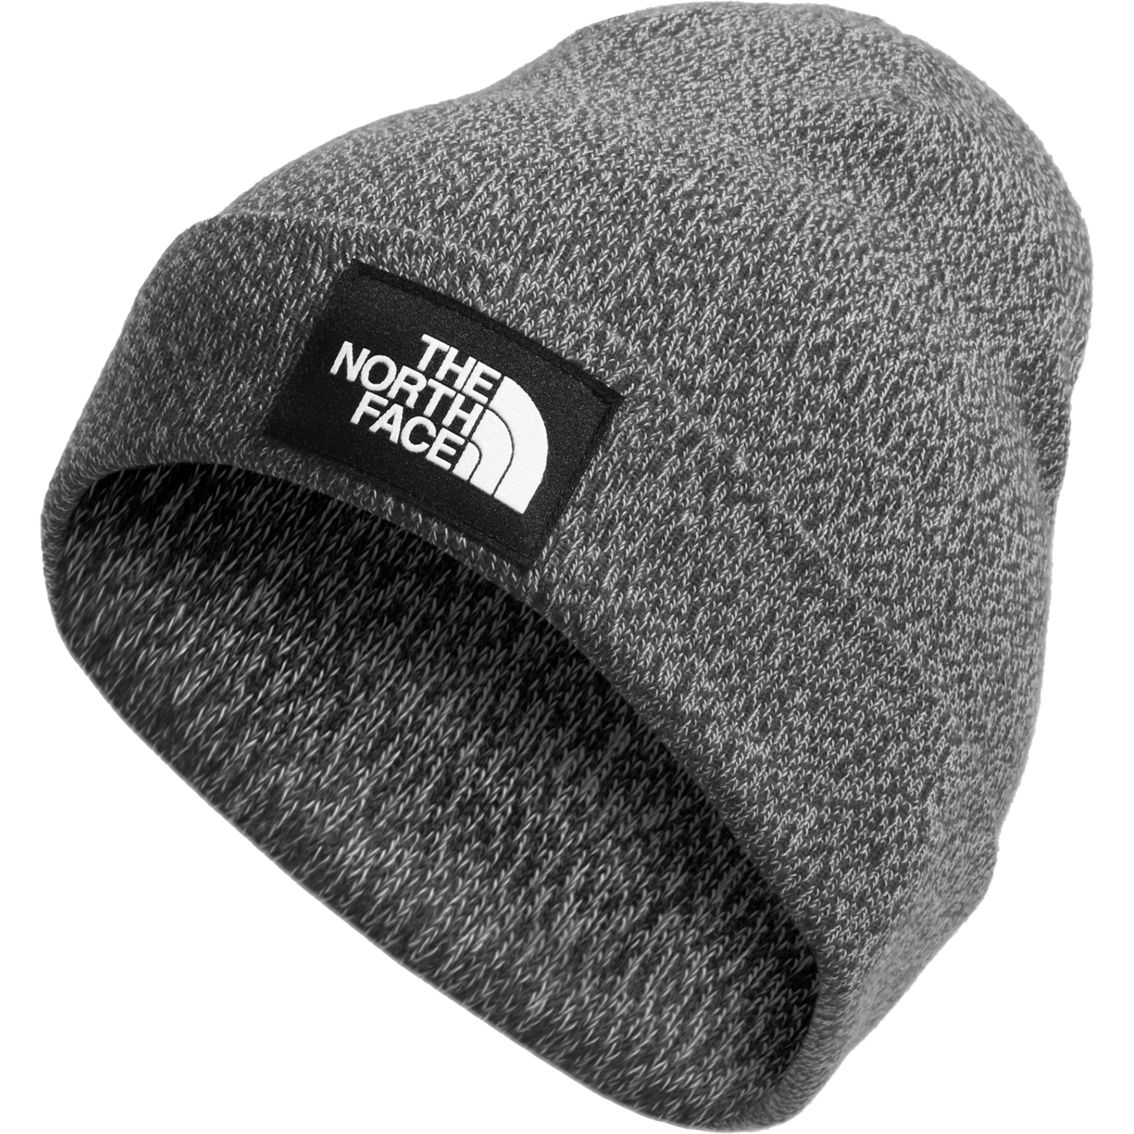 The North Face Dock Worker Beanie | Hats & Visors | Clothing ...